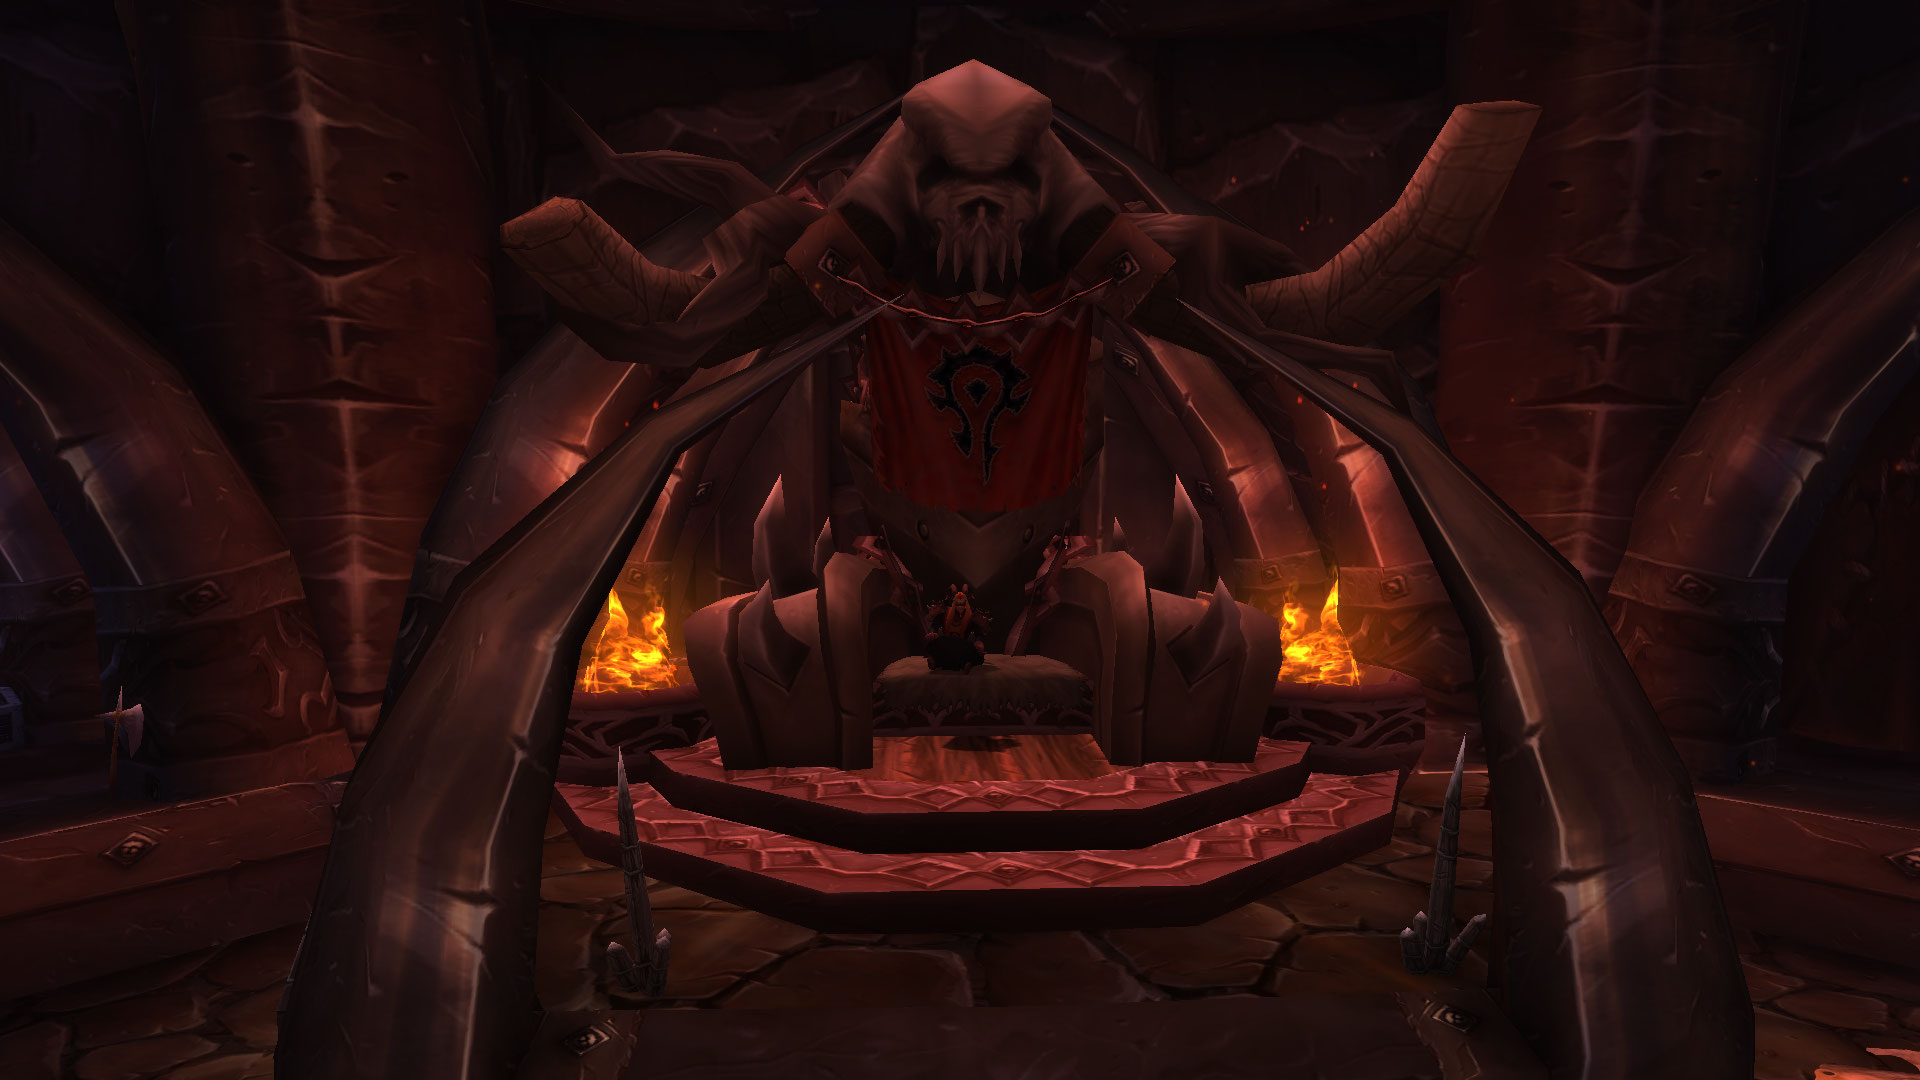 WoW The throne in The Grommash Fortress